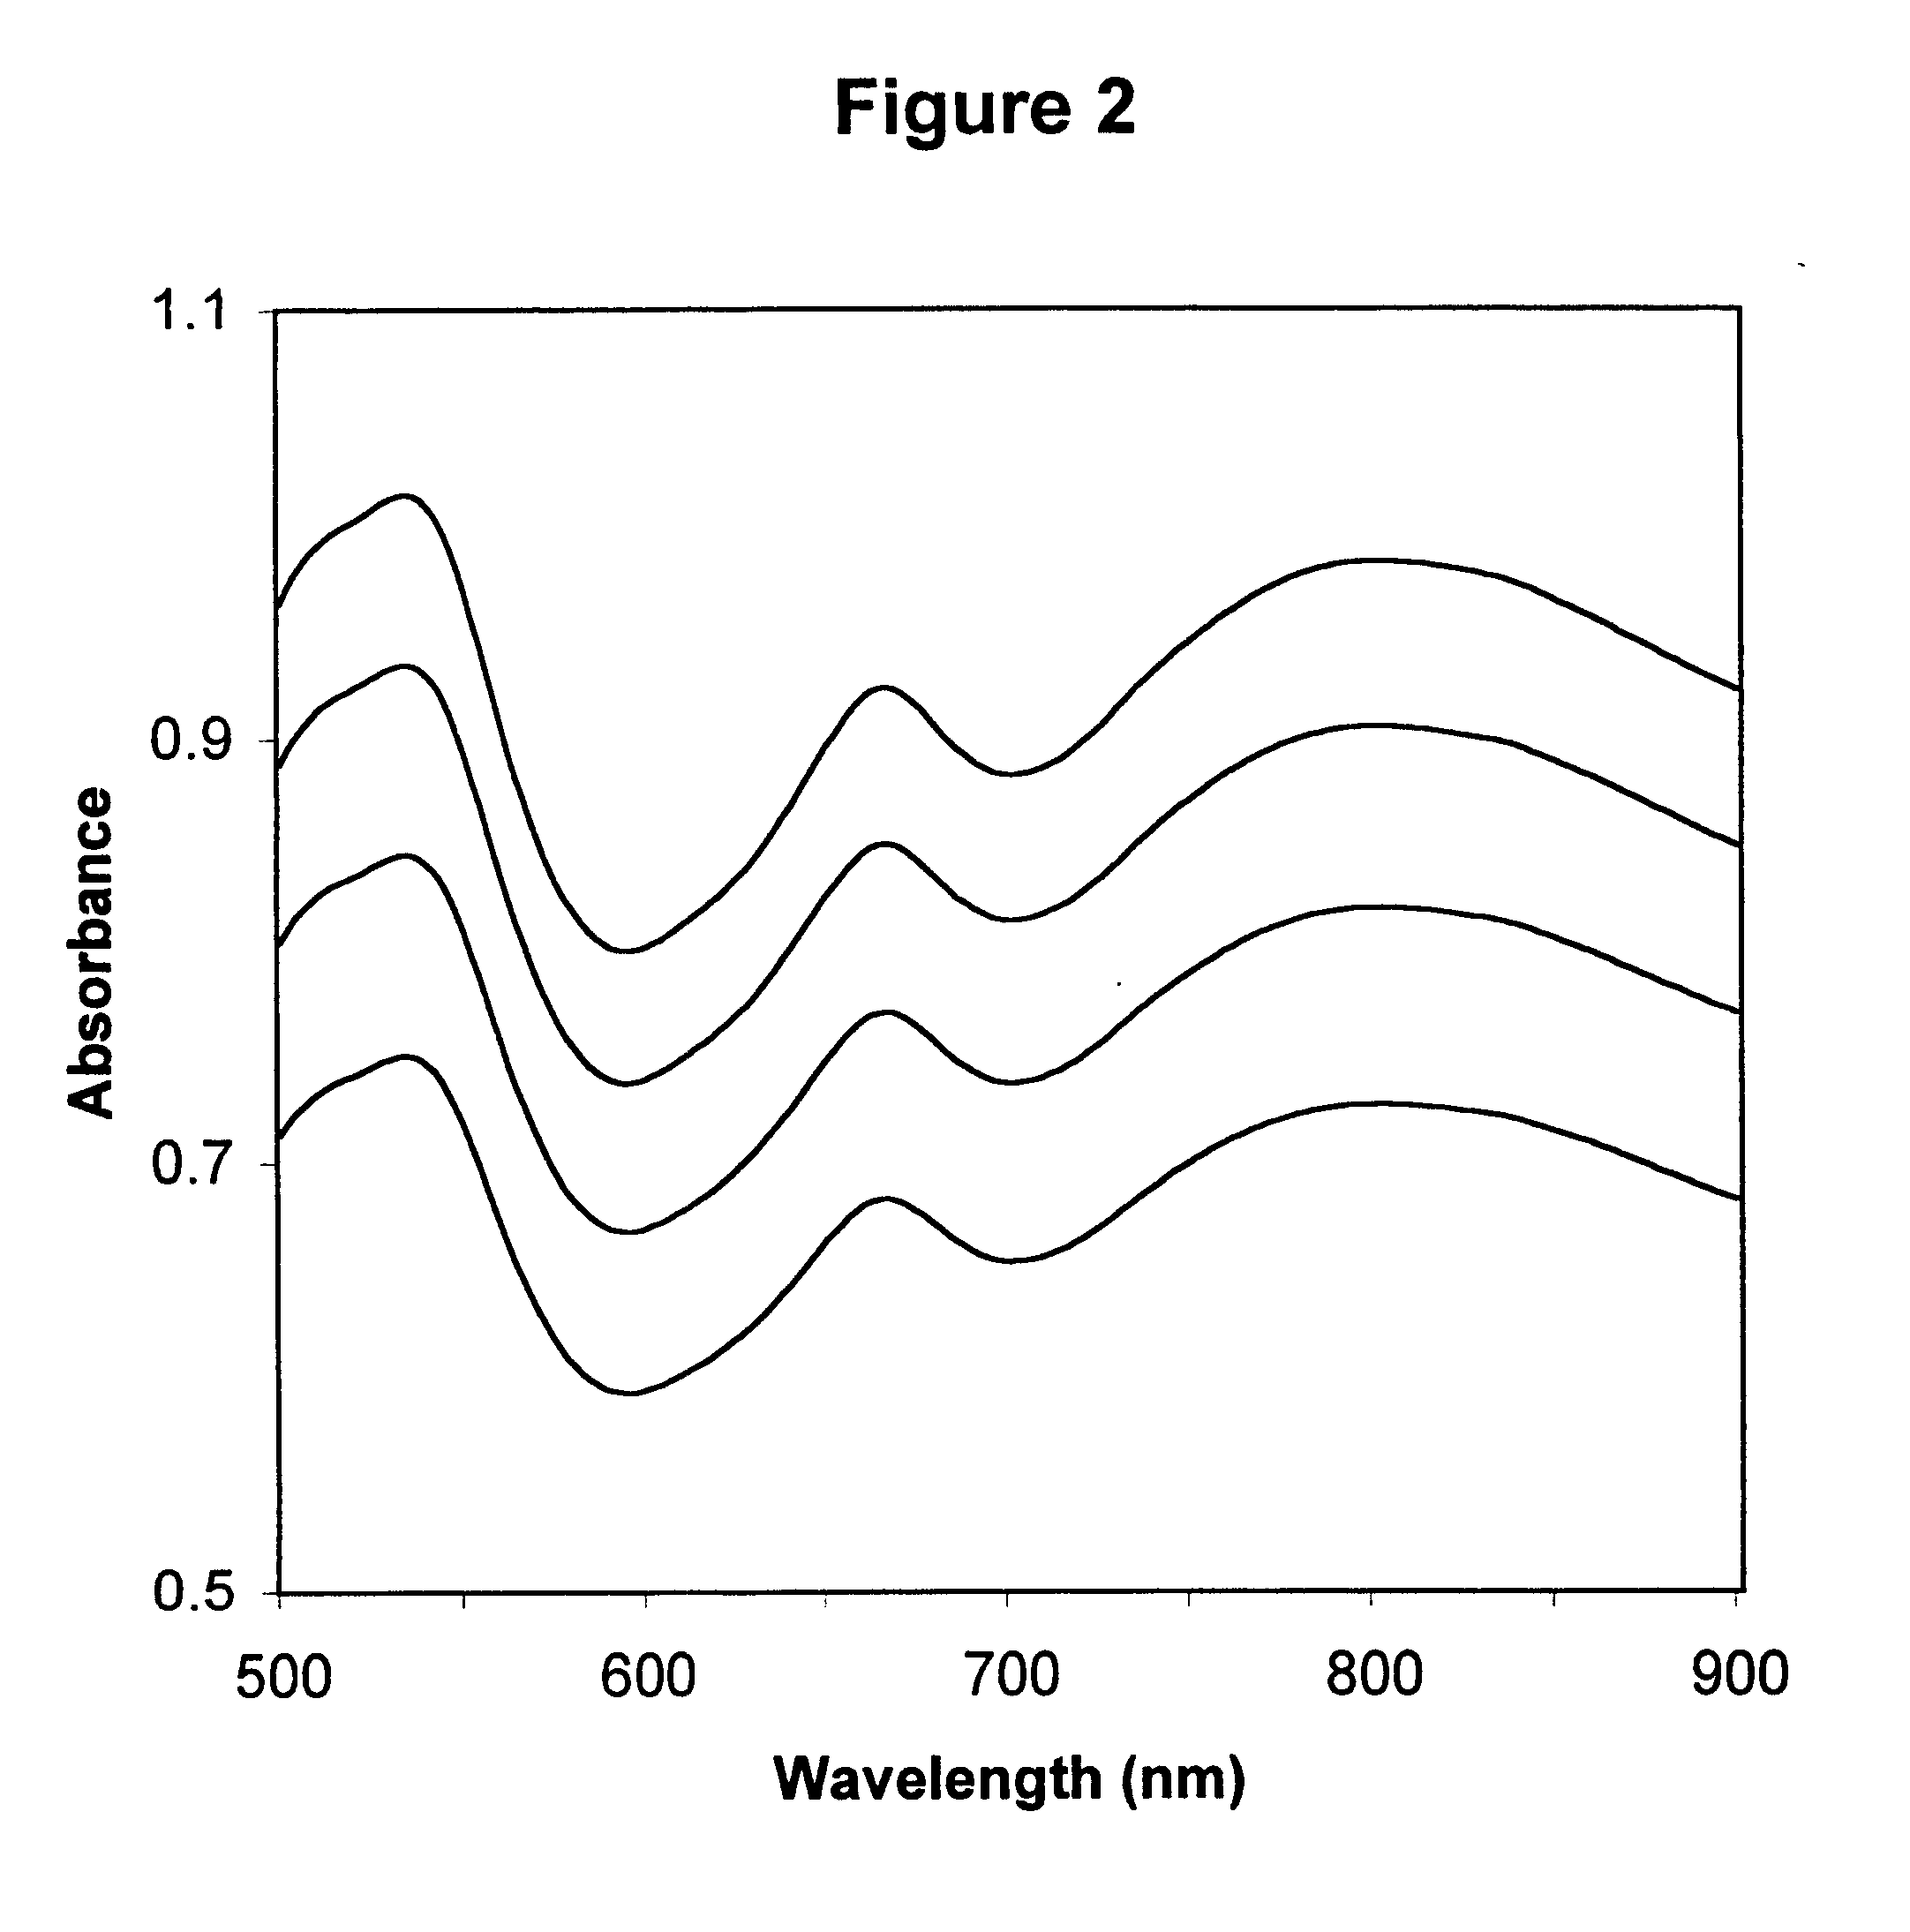 Method for calibrating spectrophotometric apparatus with synthetic fluids to measure plasma and serum analytes